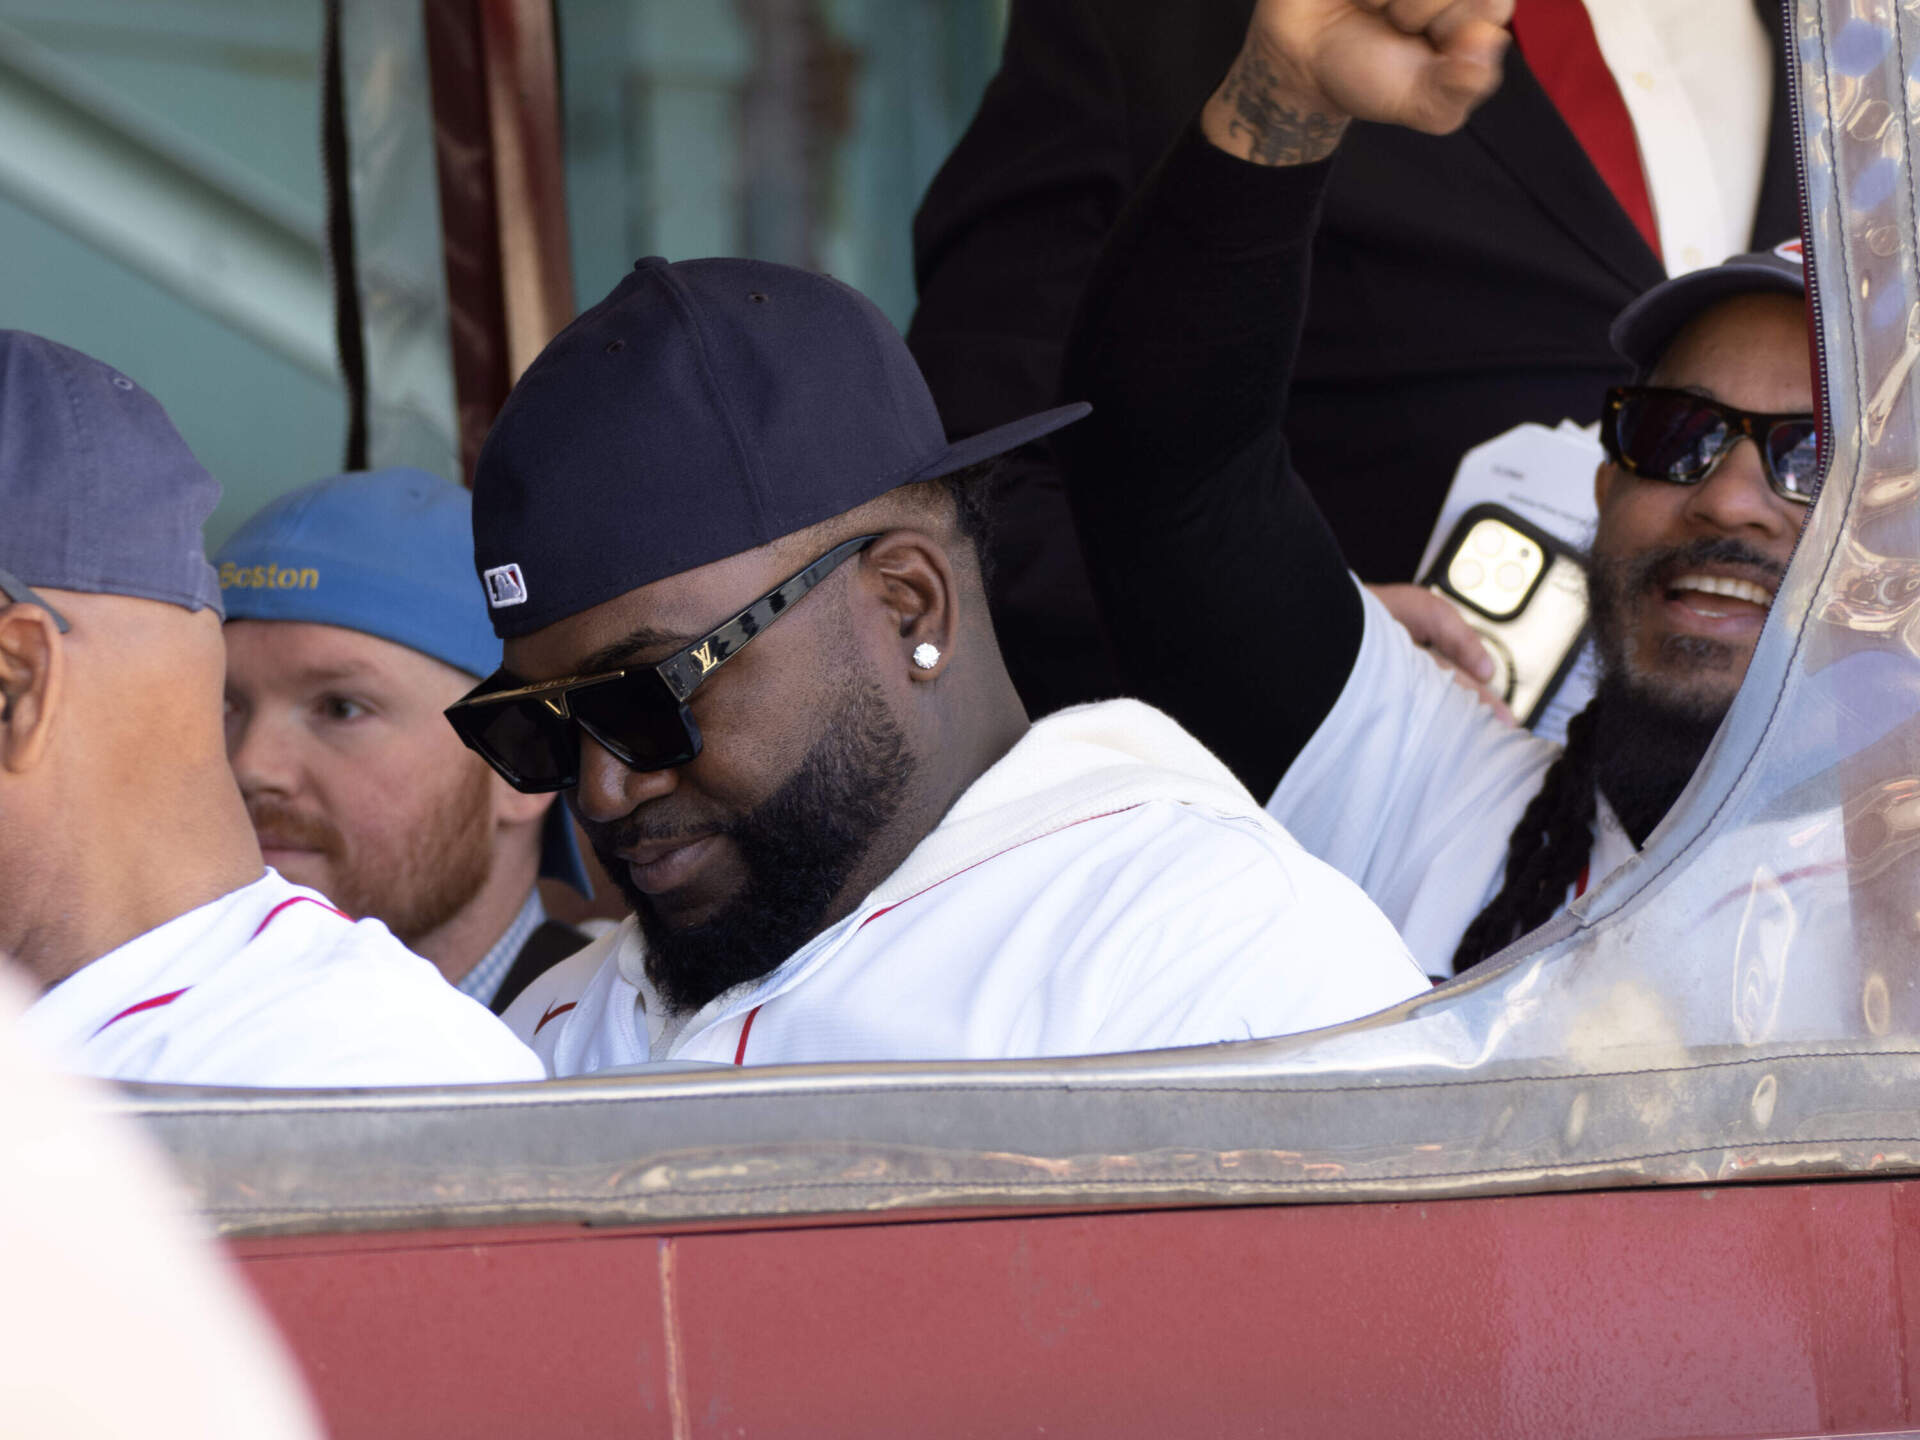 David Ortiz and Manny Ramirez, right, were among the veterans of the 2004 Red Sox to arrive at Fenway Park in Duck Boats Tuesday afternoon. (Max Larkin/WBUR)